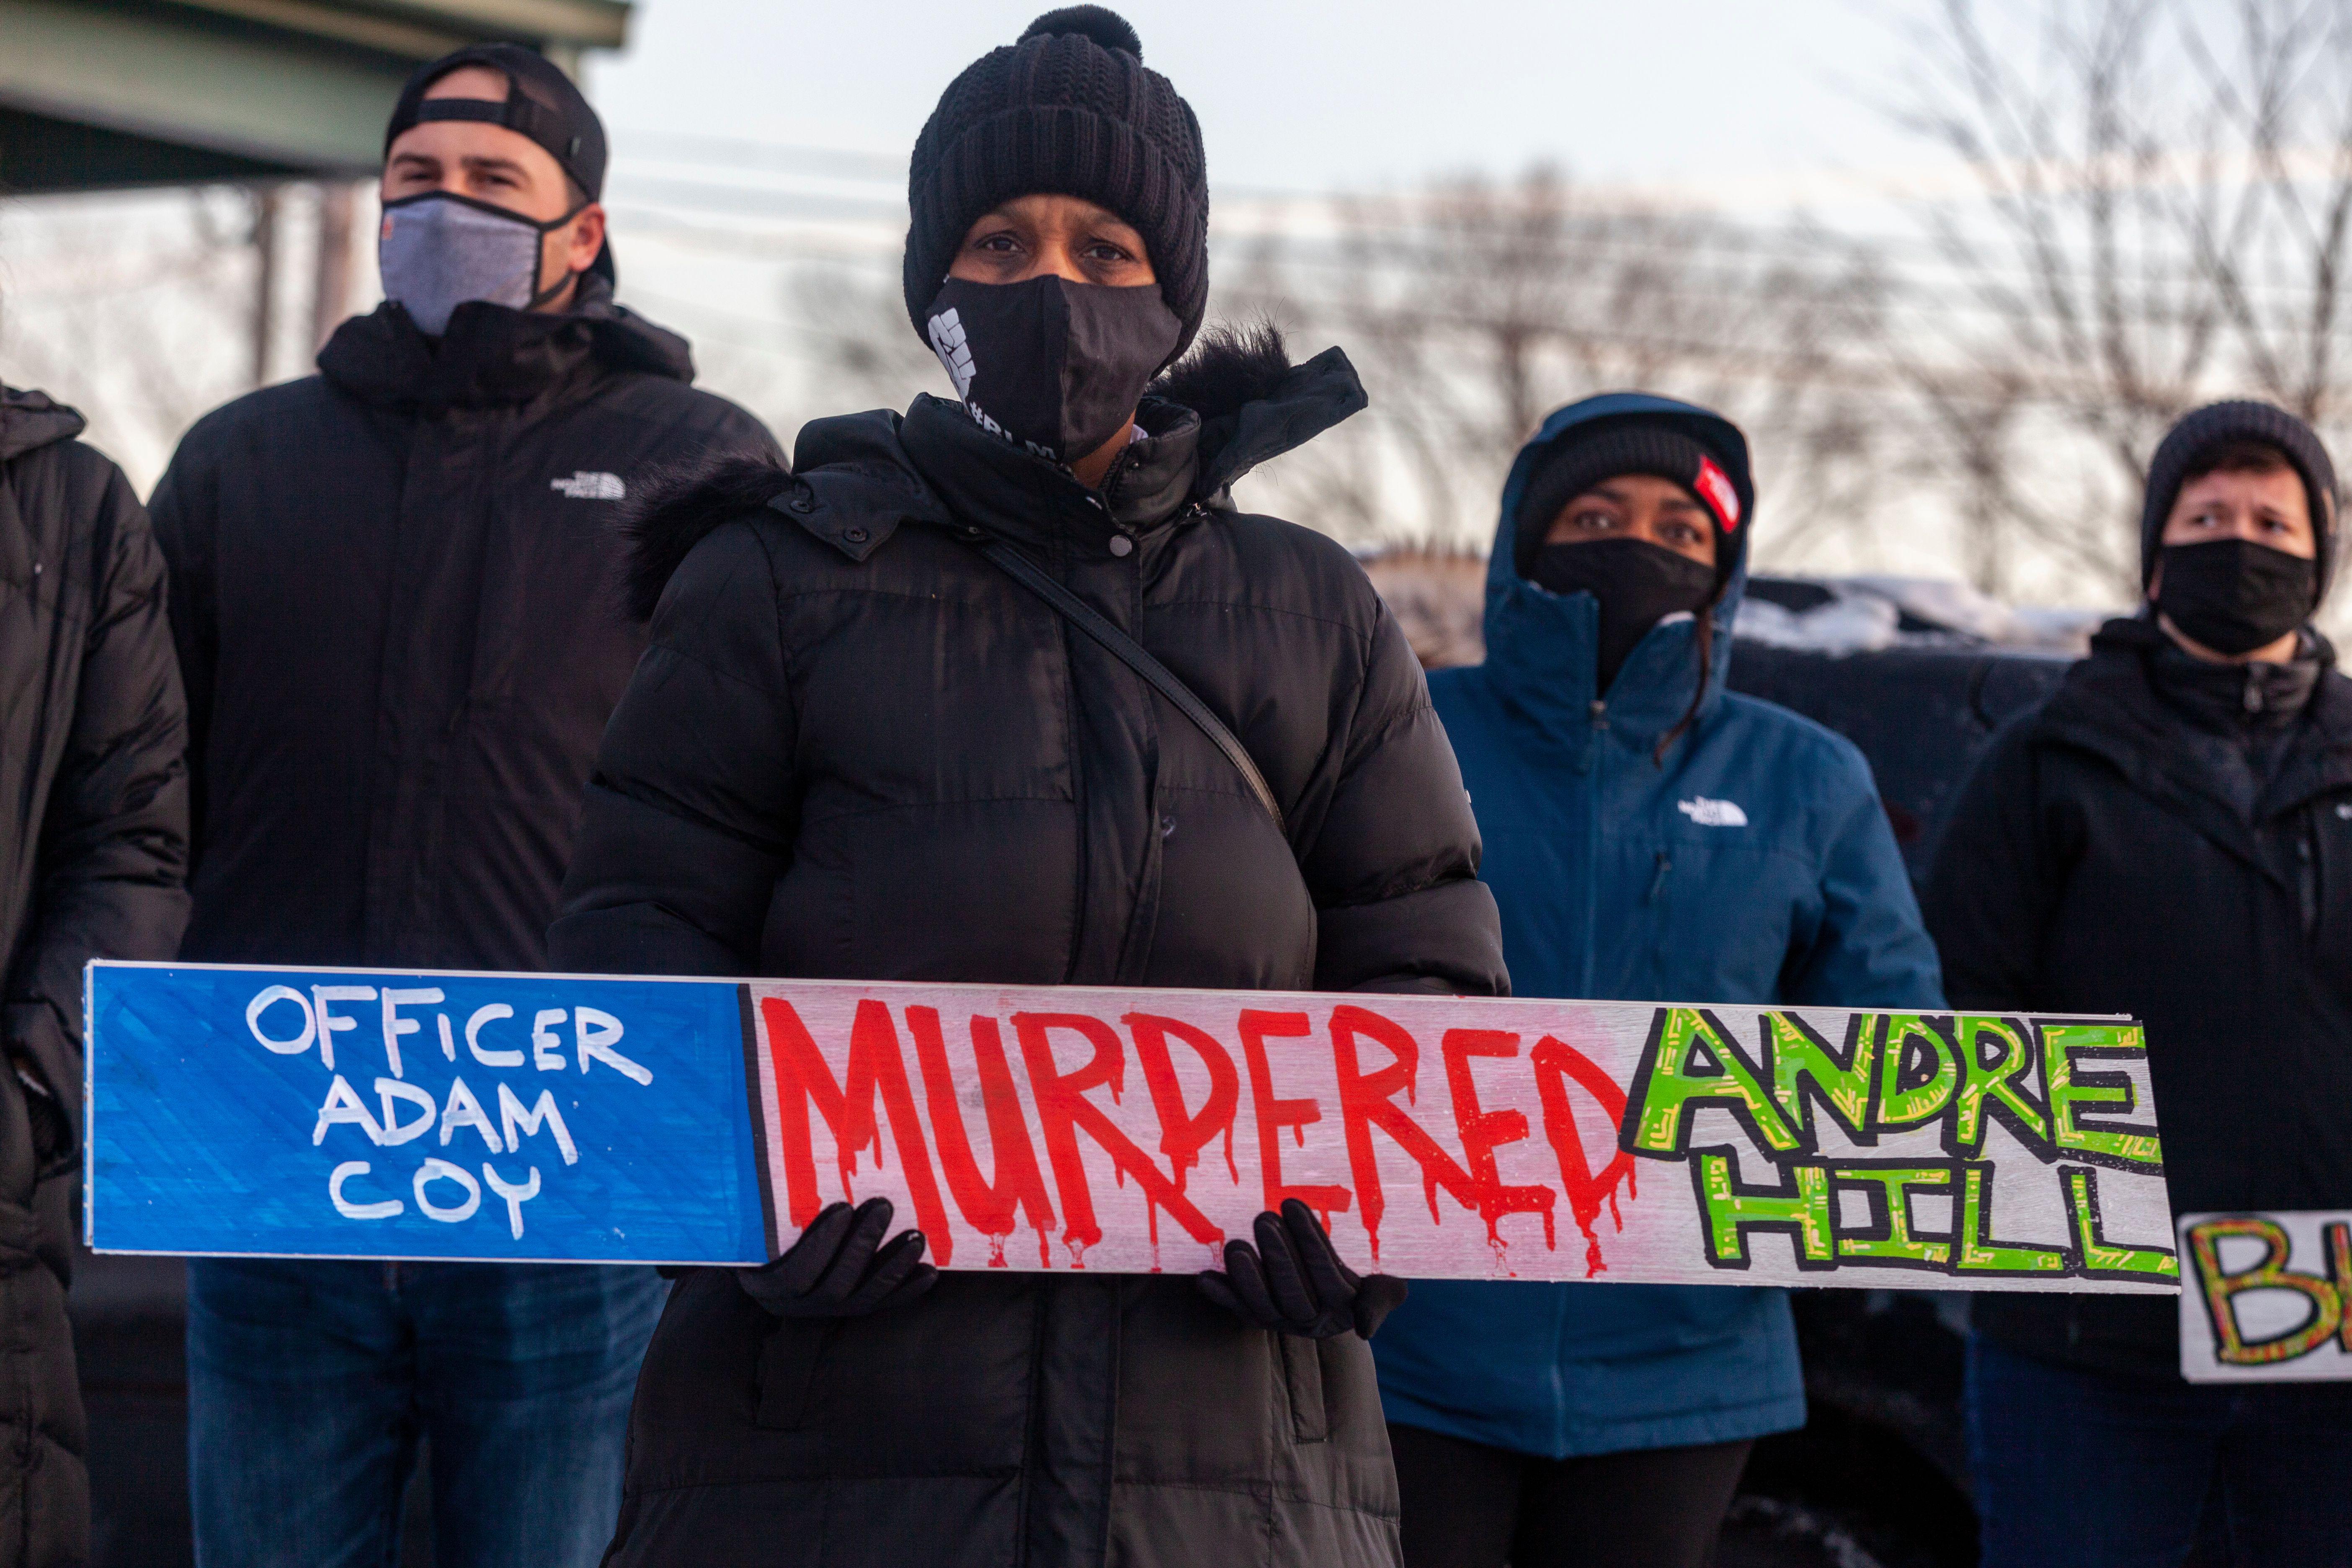 A demonstrator standing in a crowd holds a sign condemning Officer Adam Coy